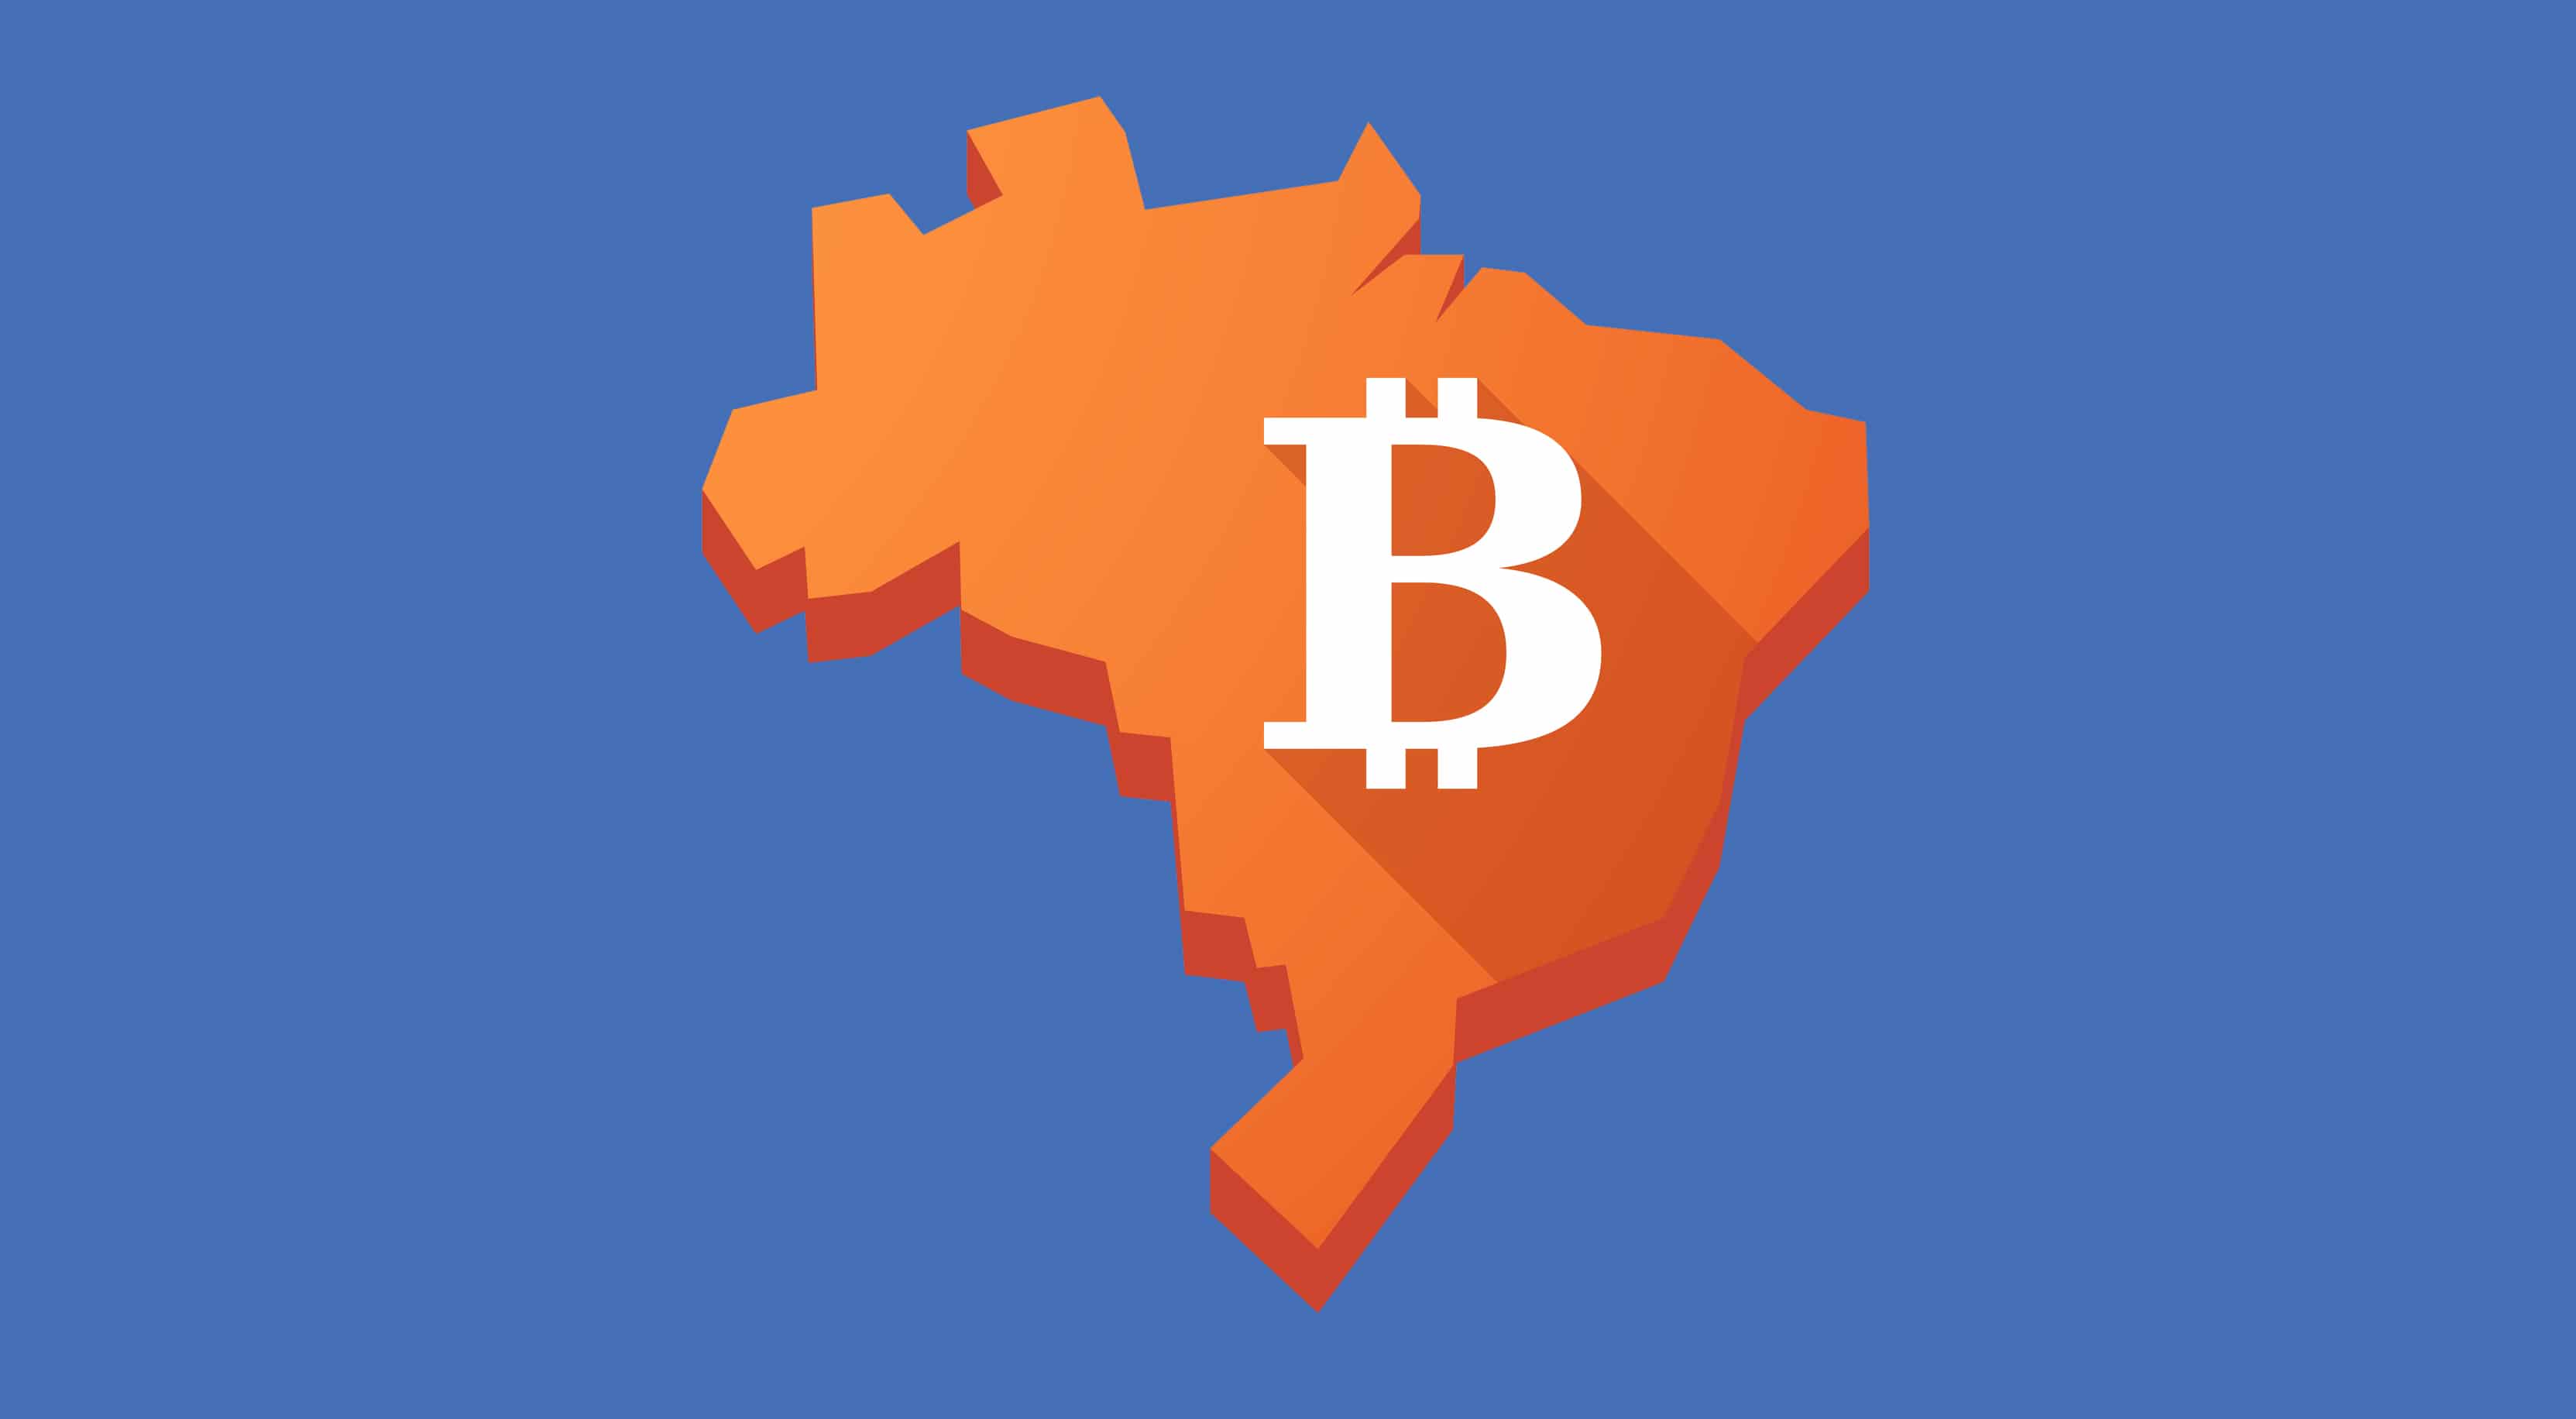 Illustration of an orange Brazil map with a bitcoin sign